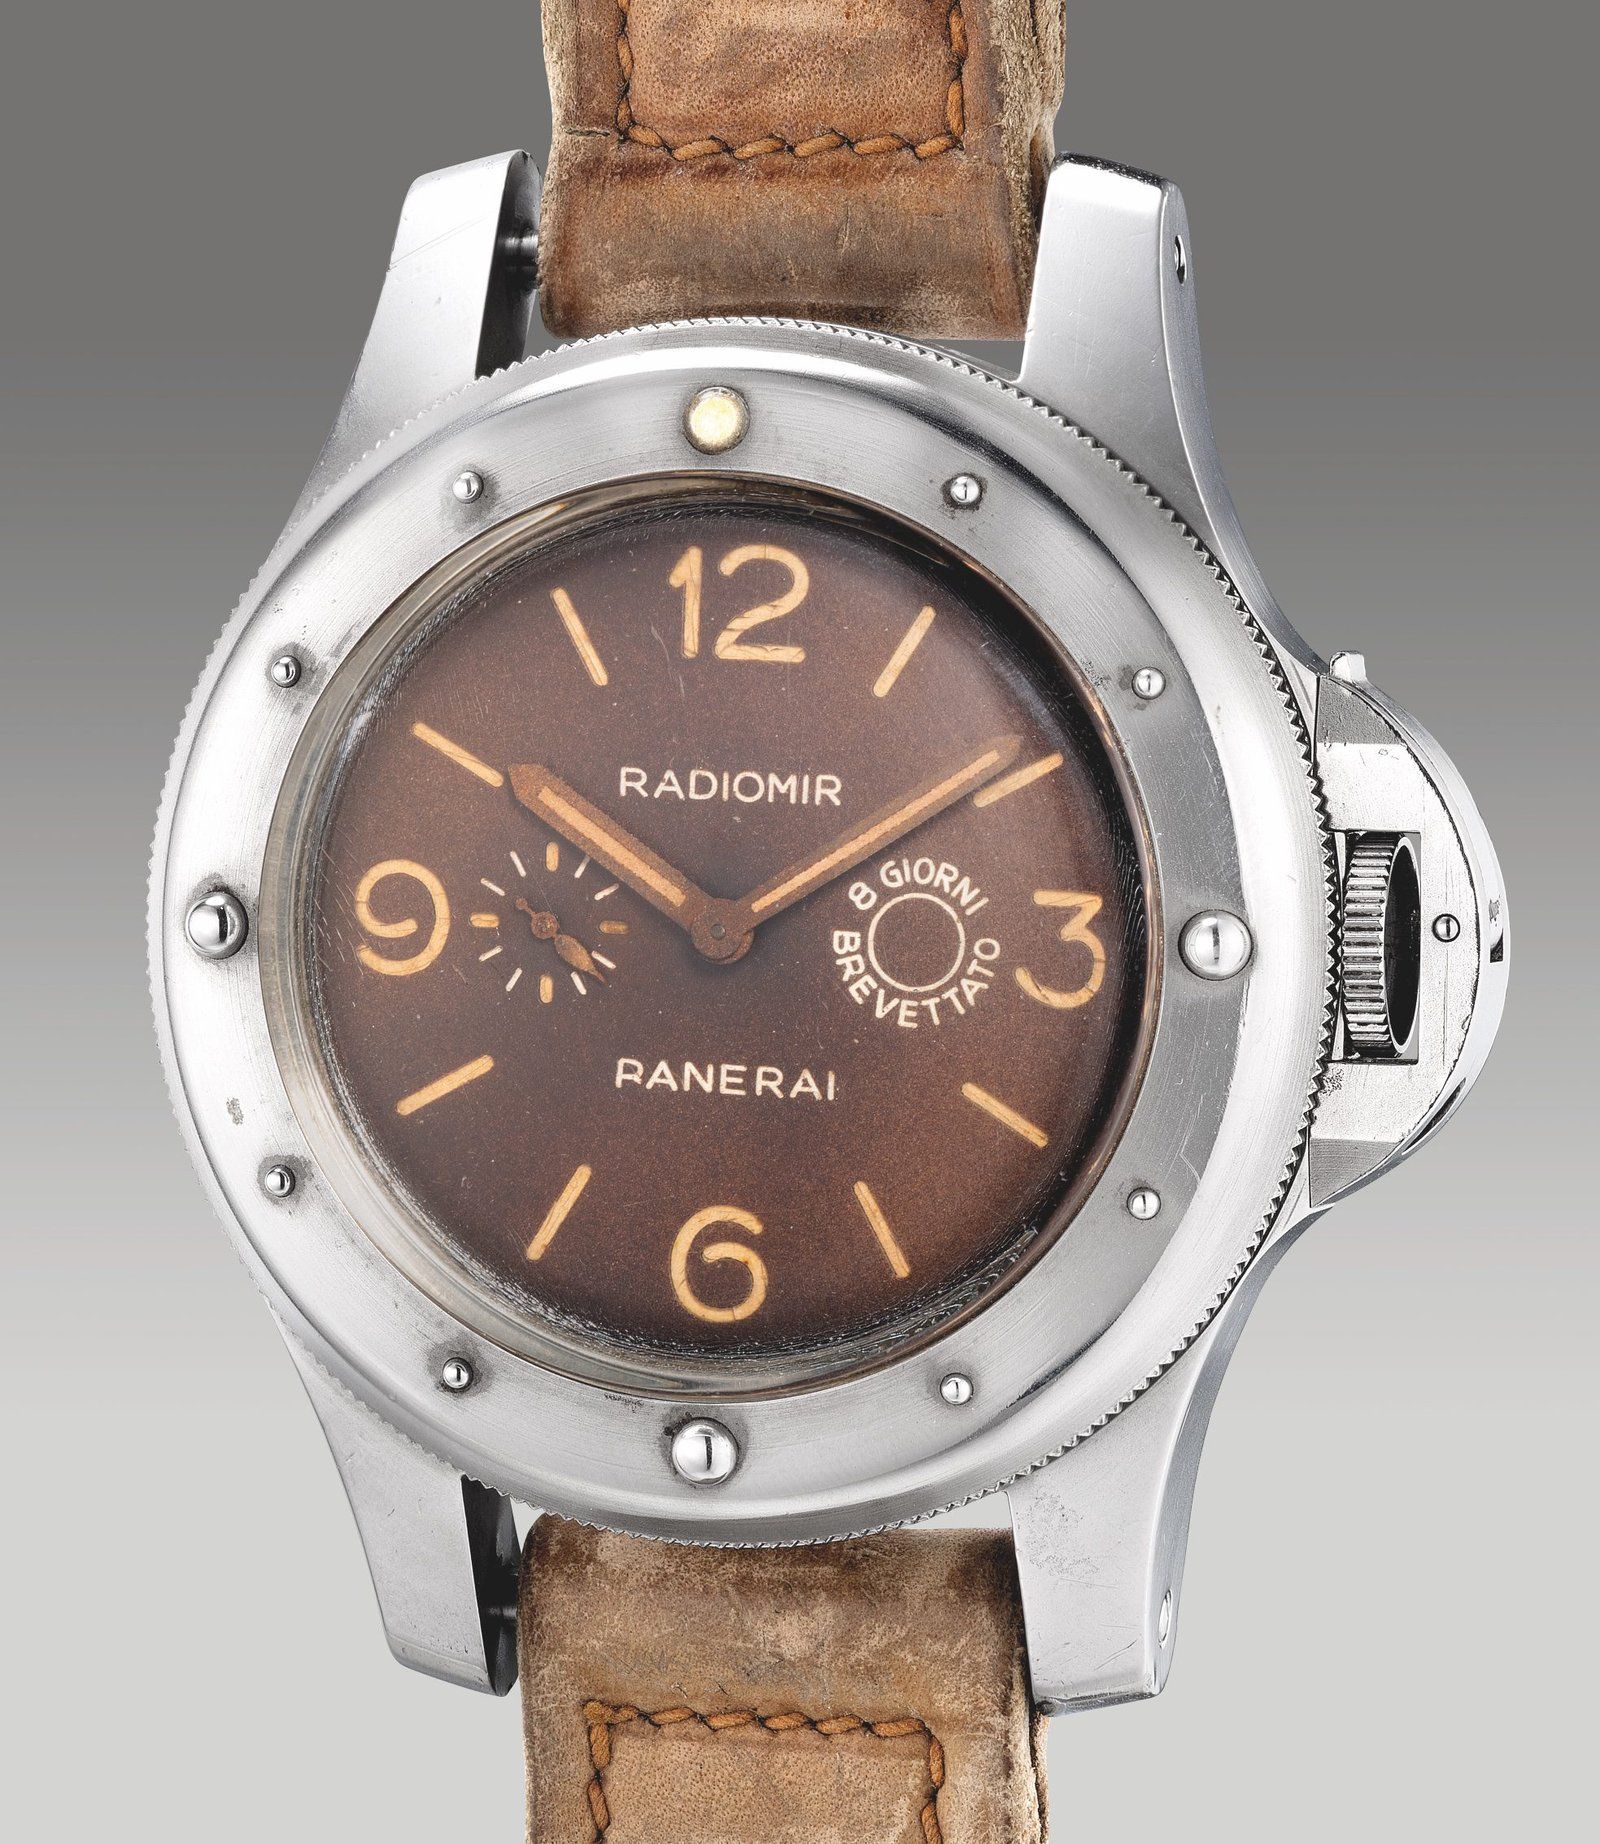 FEATURING: PANERAI - VINTAGE PANERAI WATCHES SOLD BY THE PHILLIPS AUCTION HOUSE